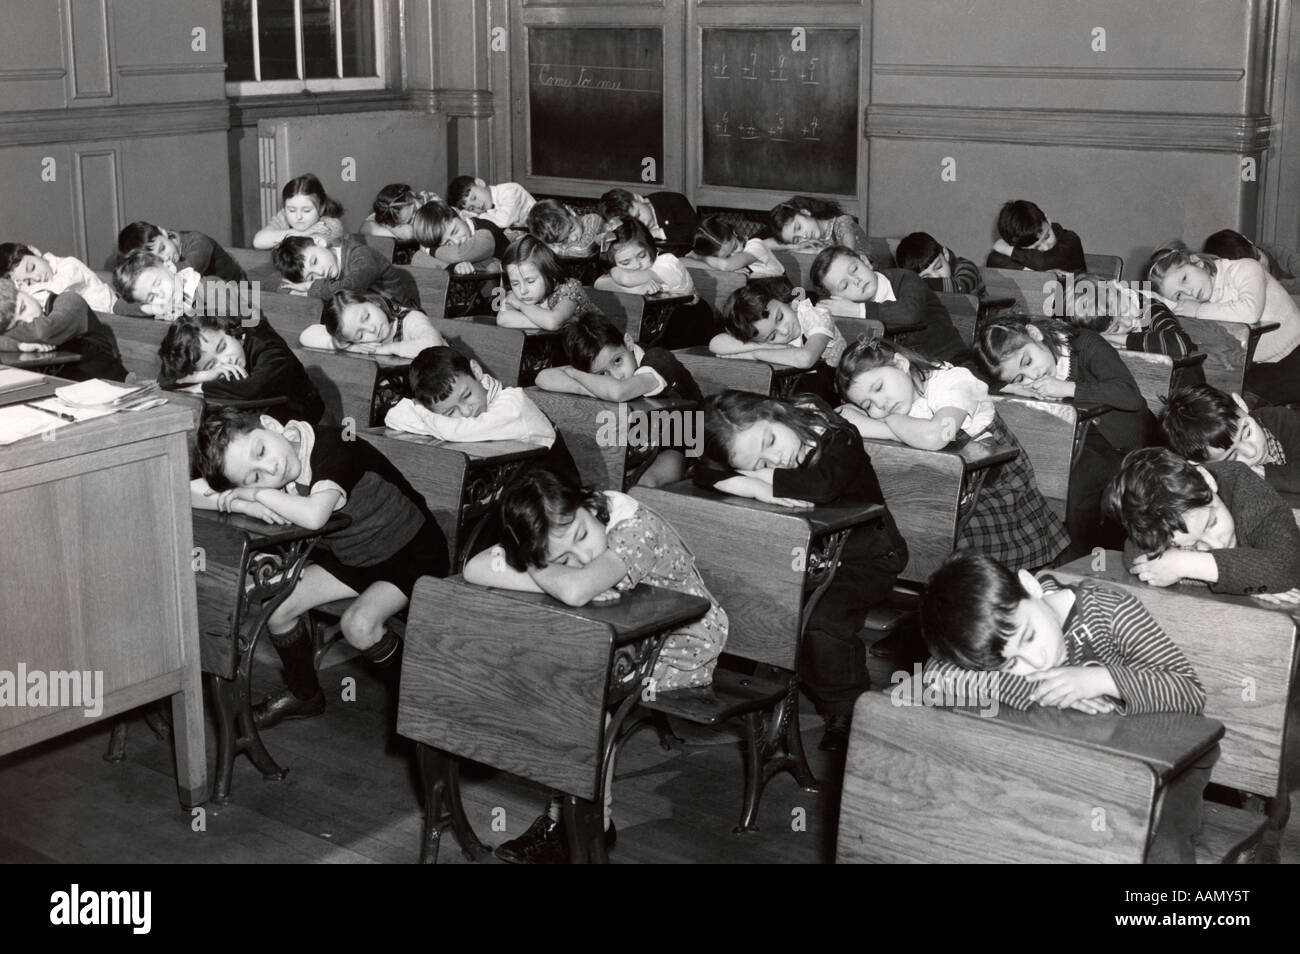 1930s ELEMENTARY GRADE SCHOOL STUDENTS CHILDREN SLEEPING WITH HEADS RESTING ON THEIR DESKS Stock Photo